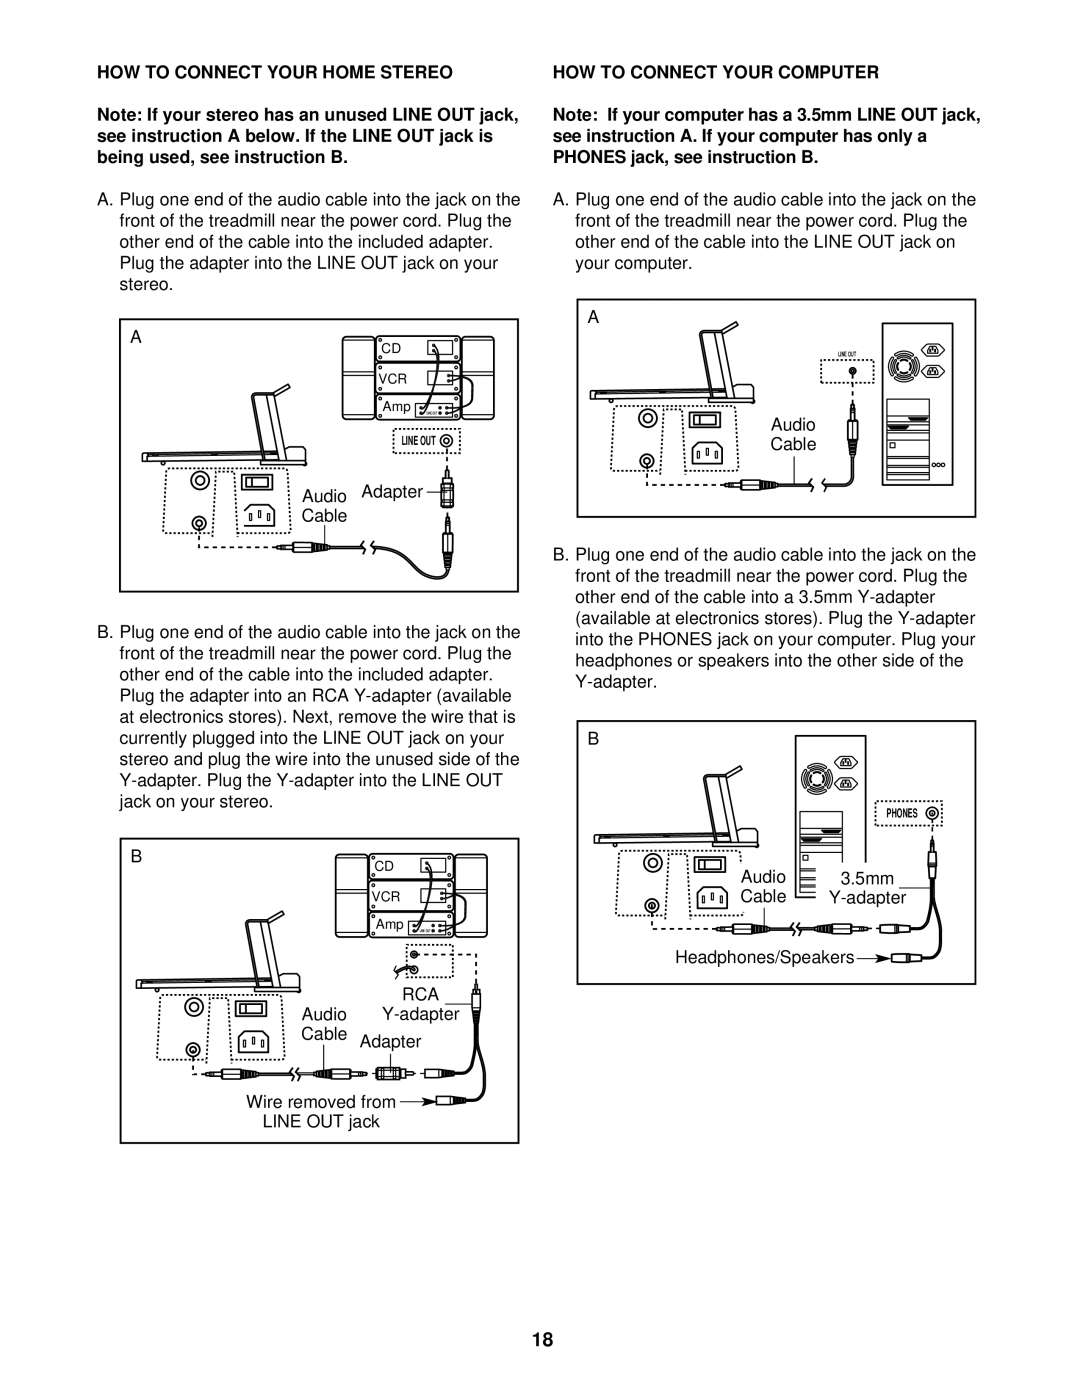 ProForm PFTL69711 user manual HOW to Connect Your Home Stereo, HOW to Connect Your Computer 